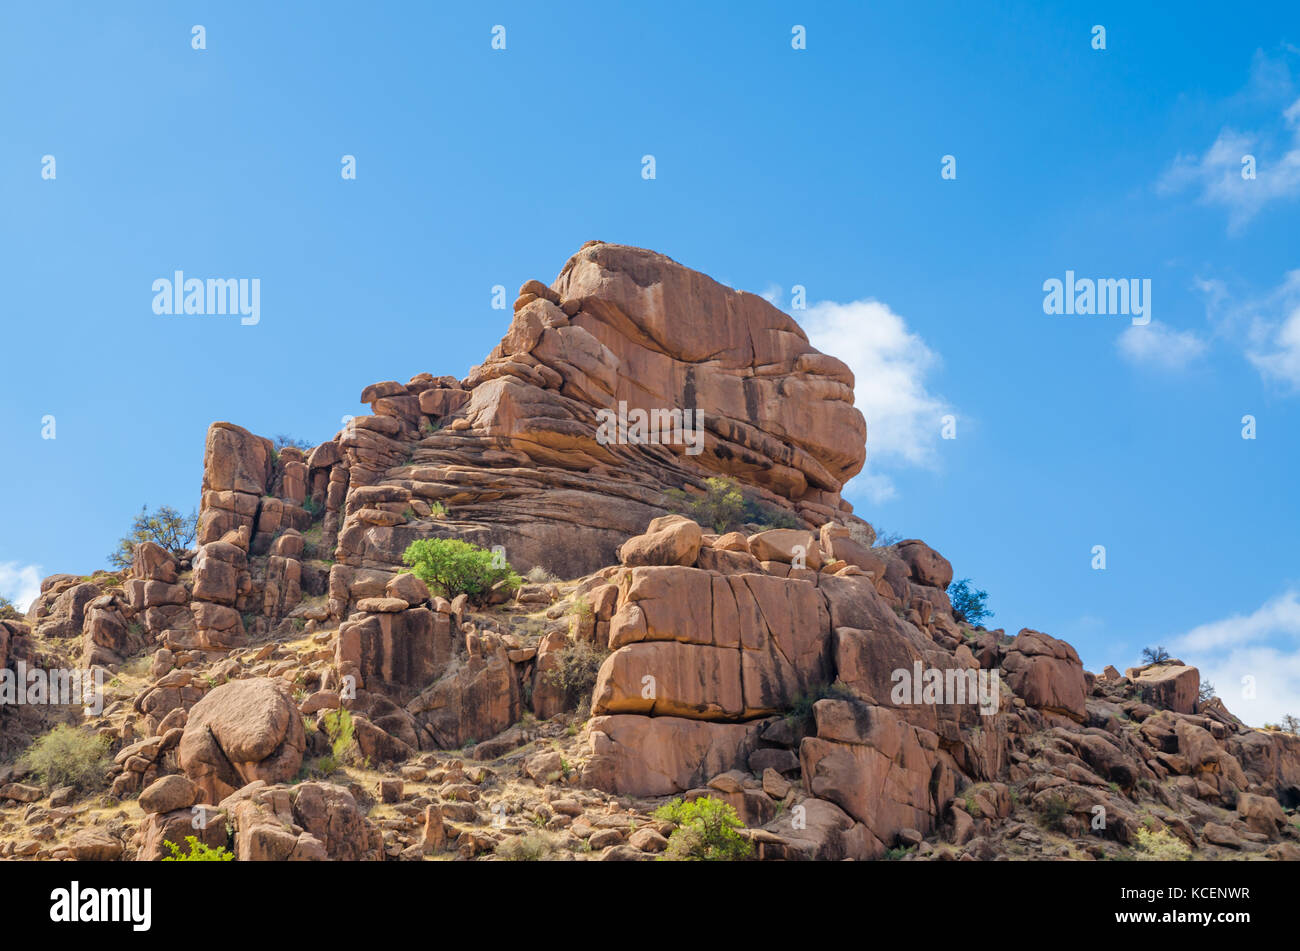 Red rocky landscape in atlas mountain region of Morocco, North Africa Stock Photo